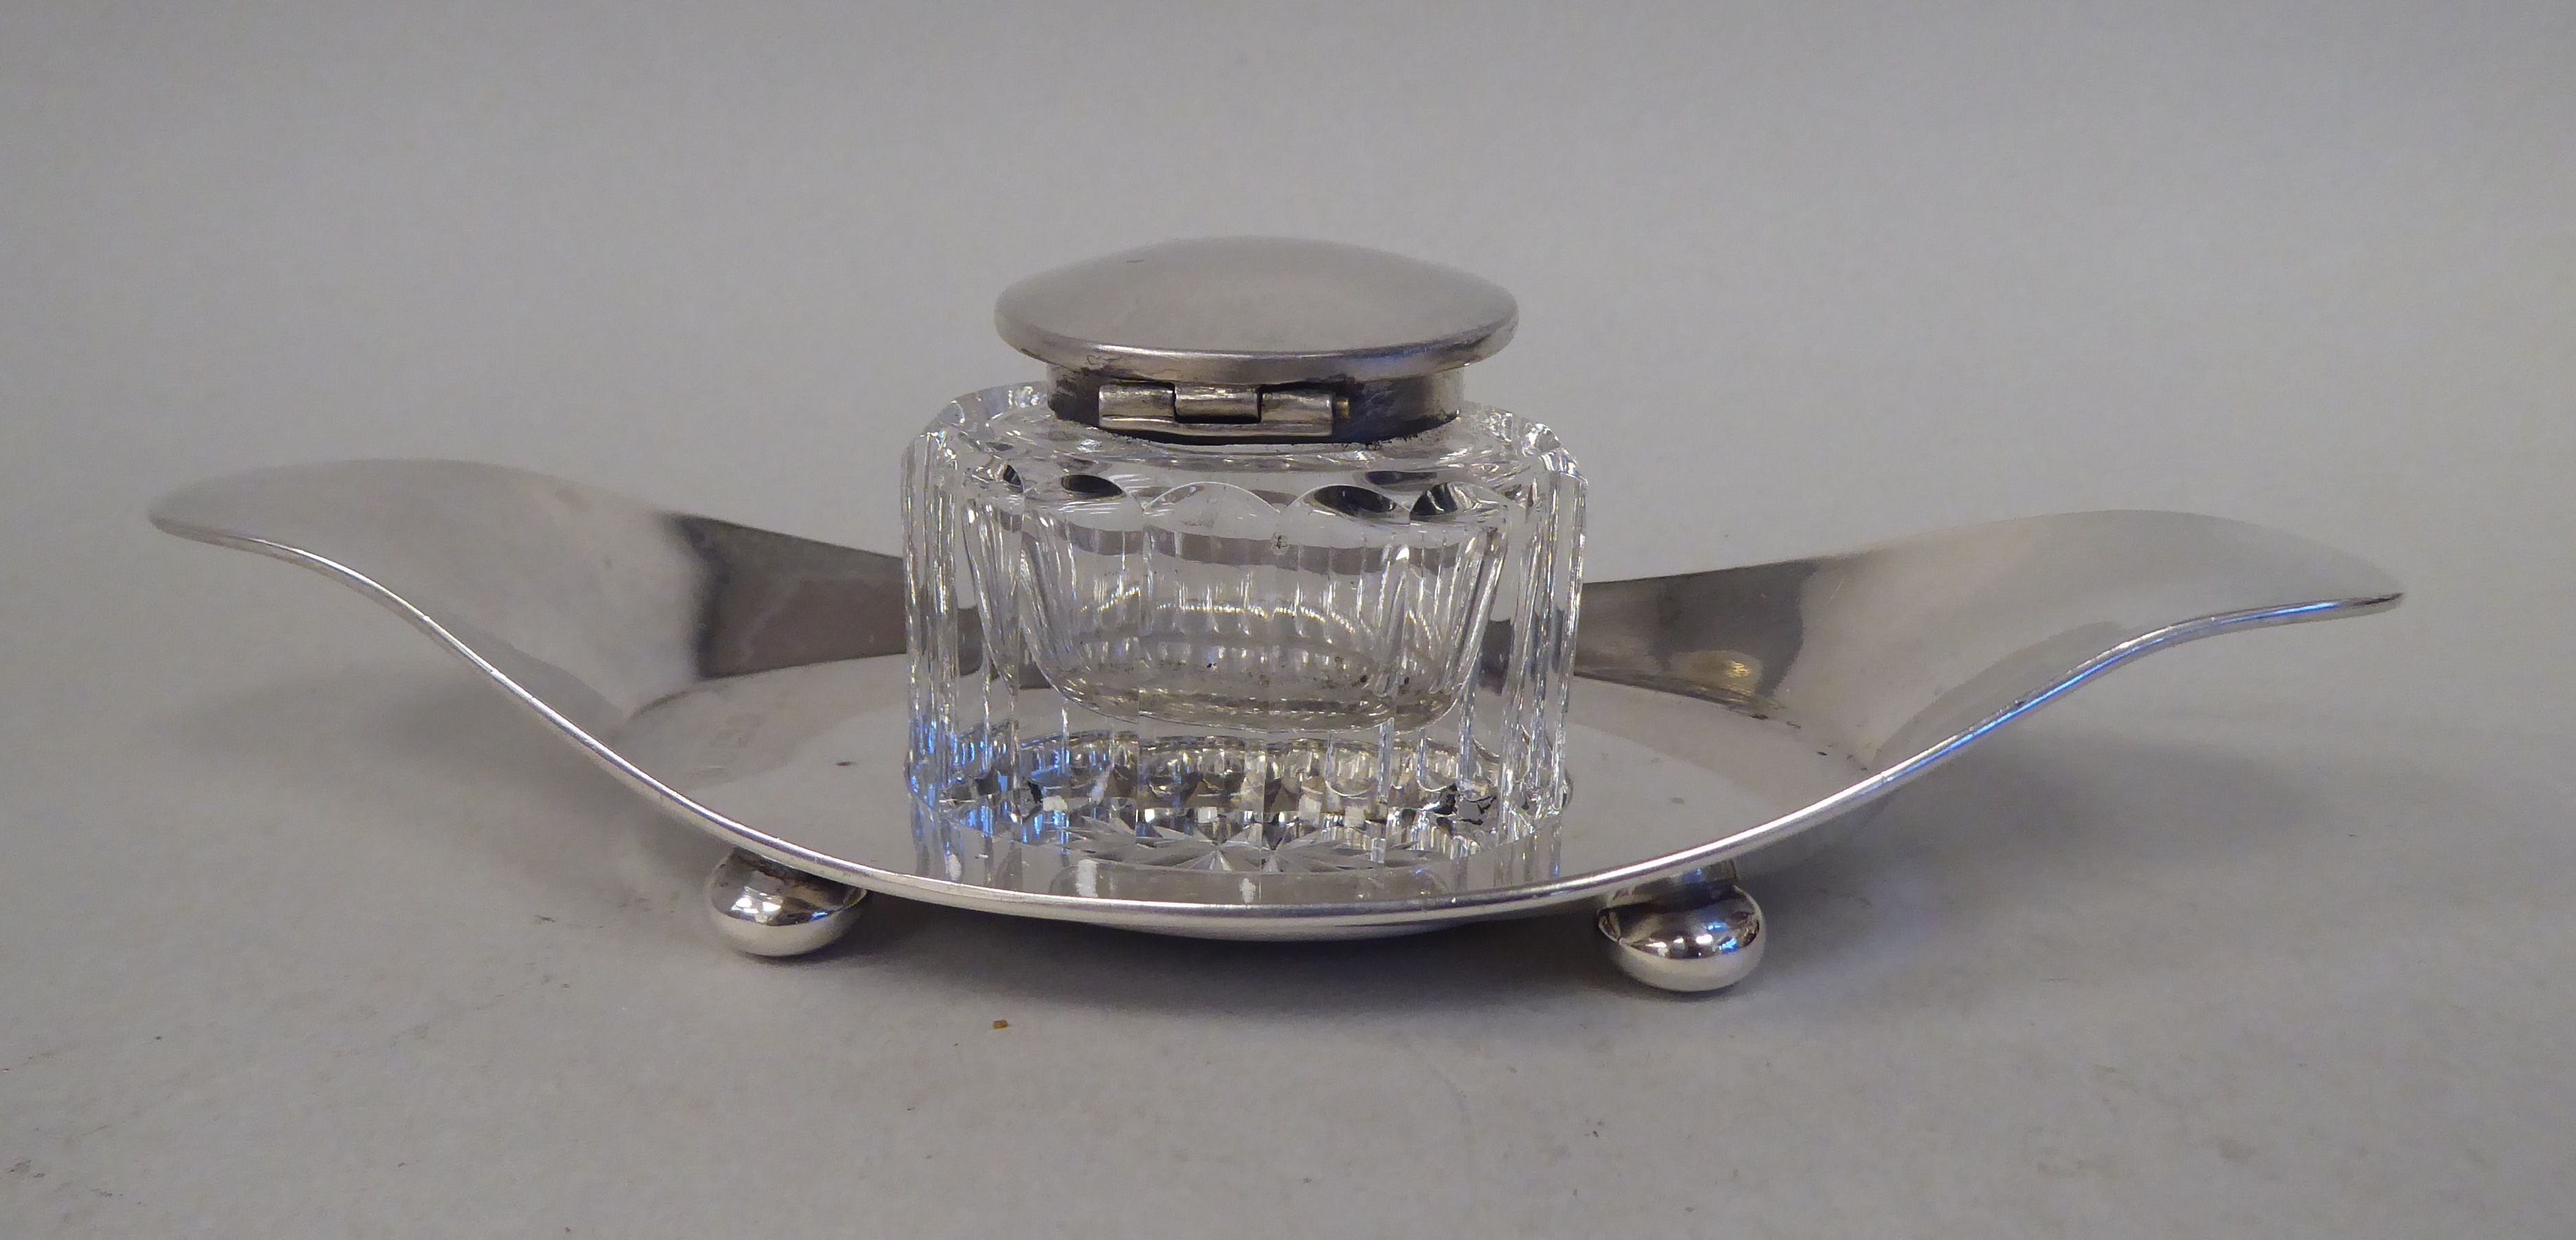 An Edwardian silver inkstand of oval tray design, on bun feet with a facet cut glass reservoir, - Image 2 of 7